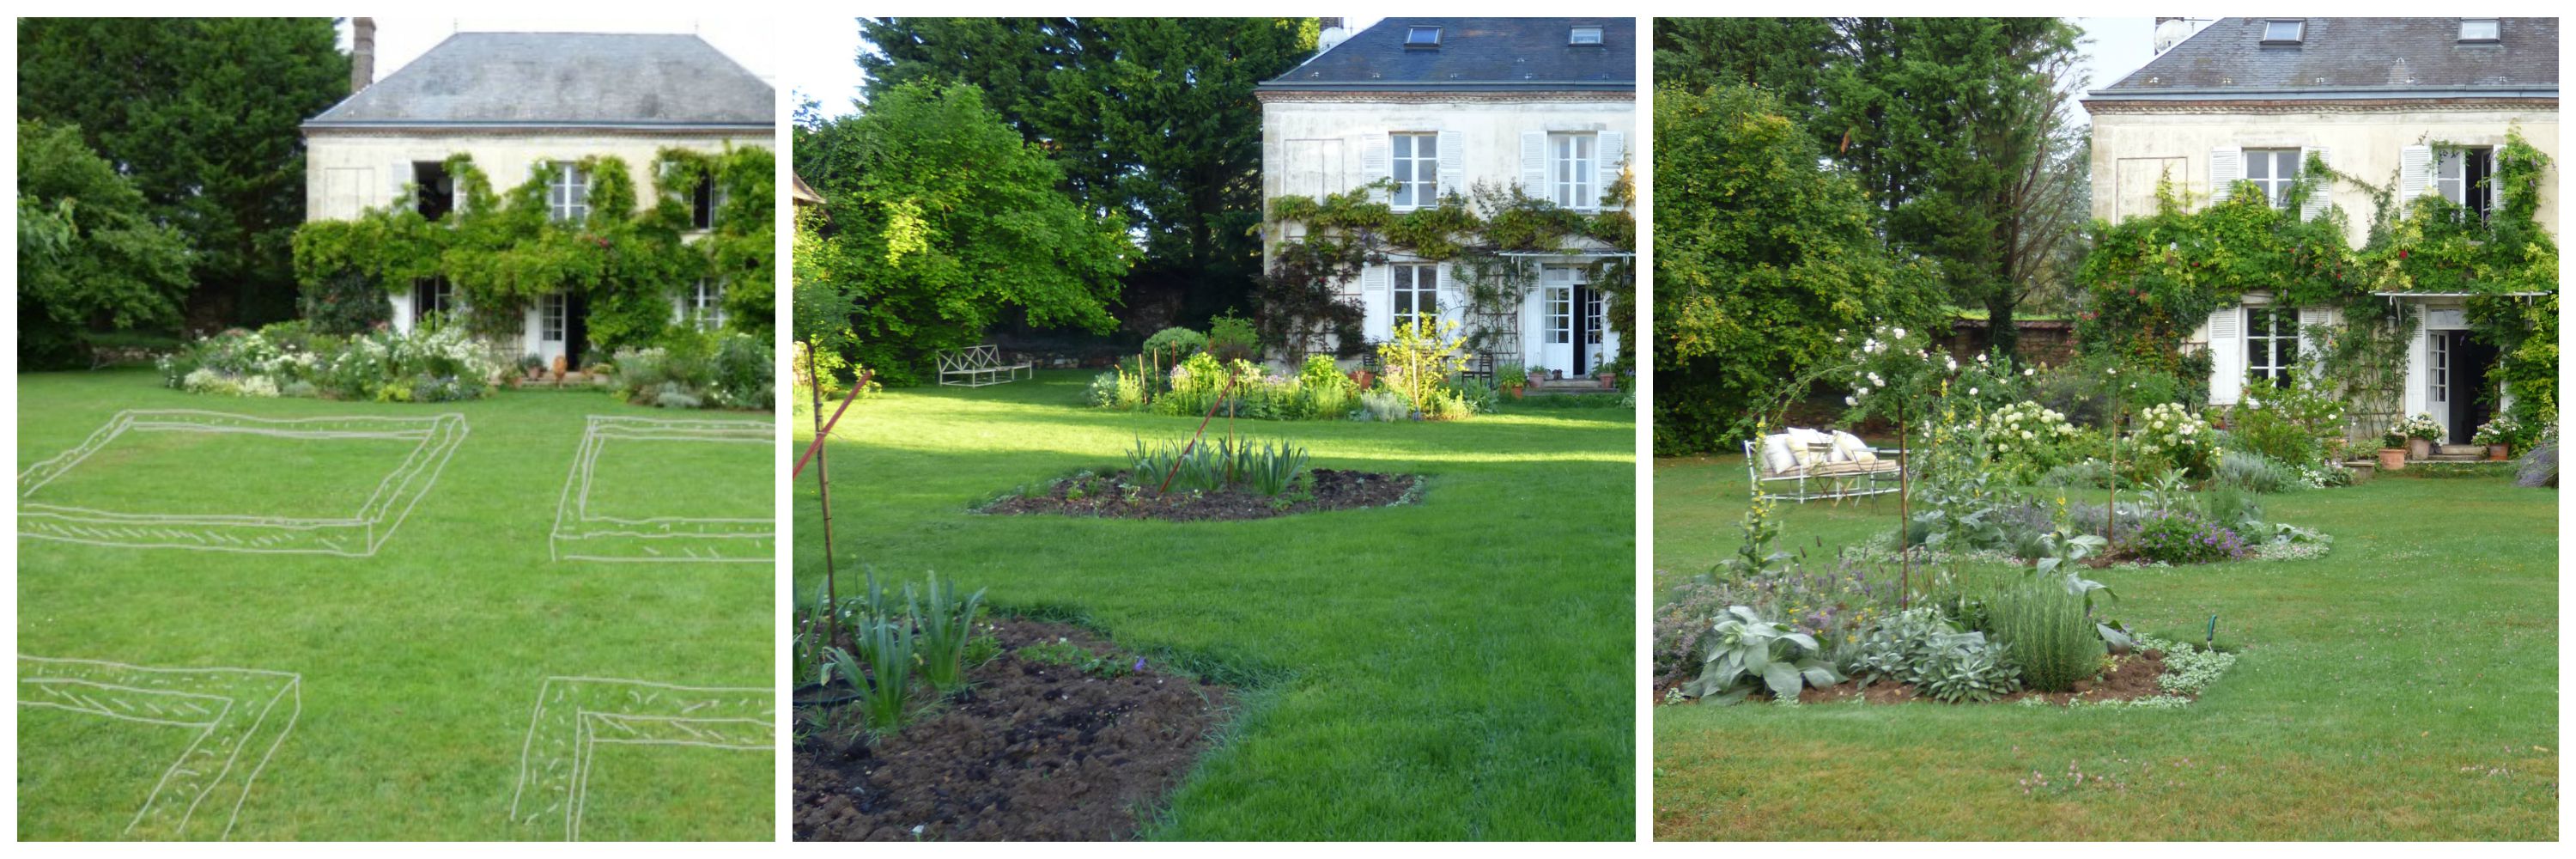 parterres-my-french-country-home